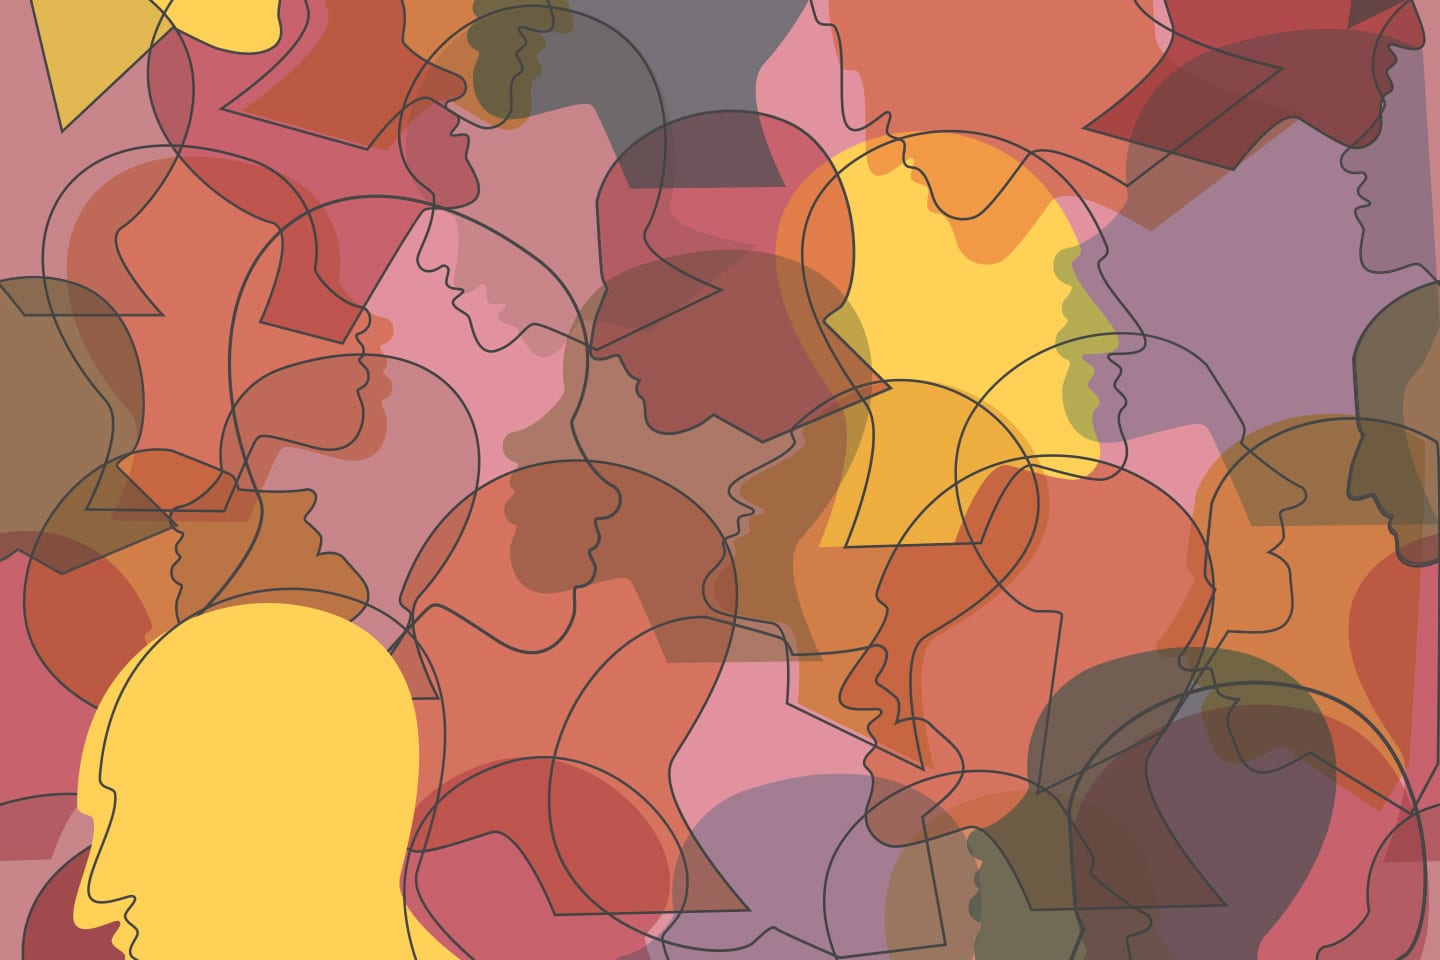 silhouettes of heads overlapping in different colors